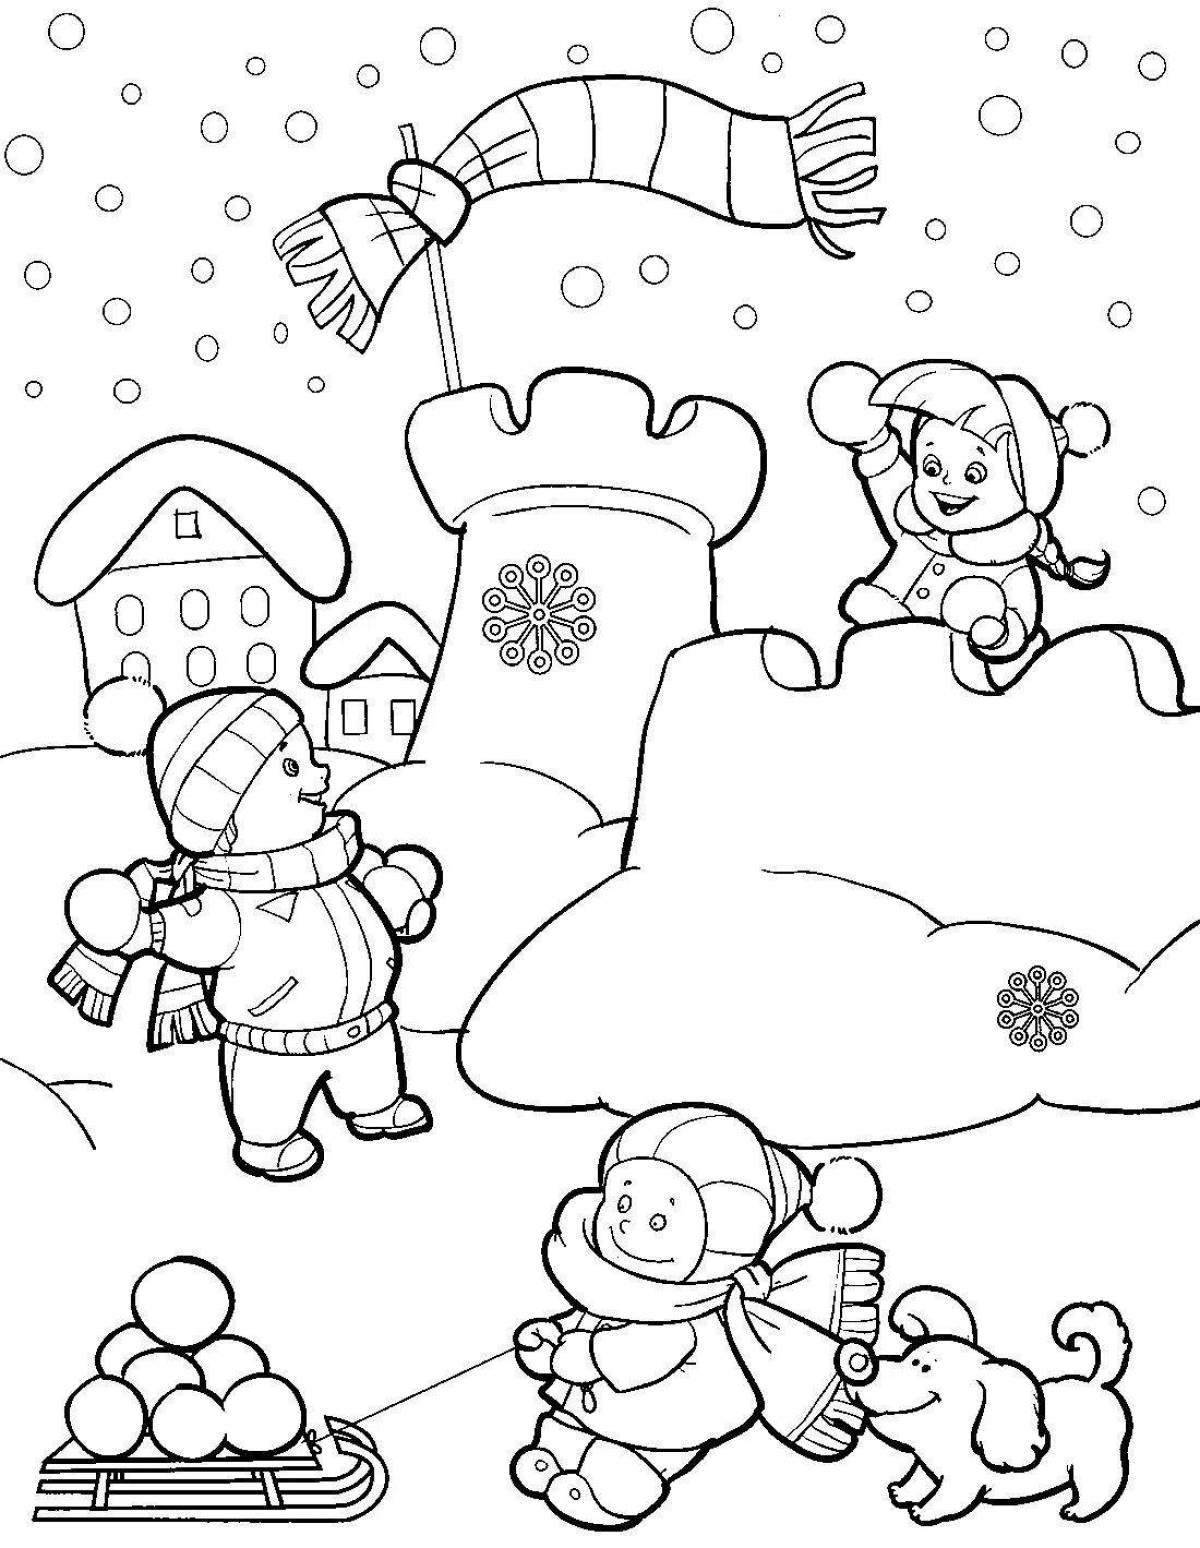 Snowball coloring pages for kids